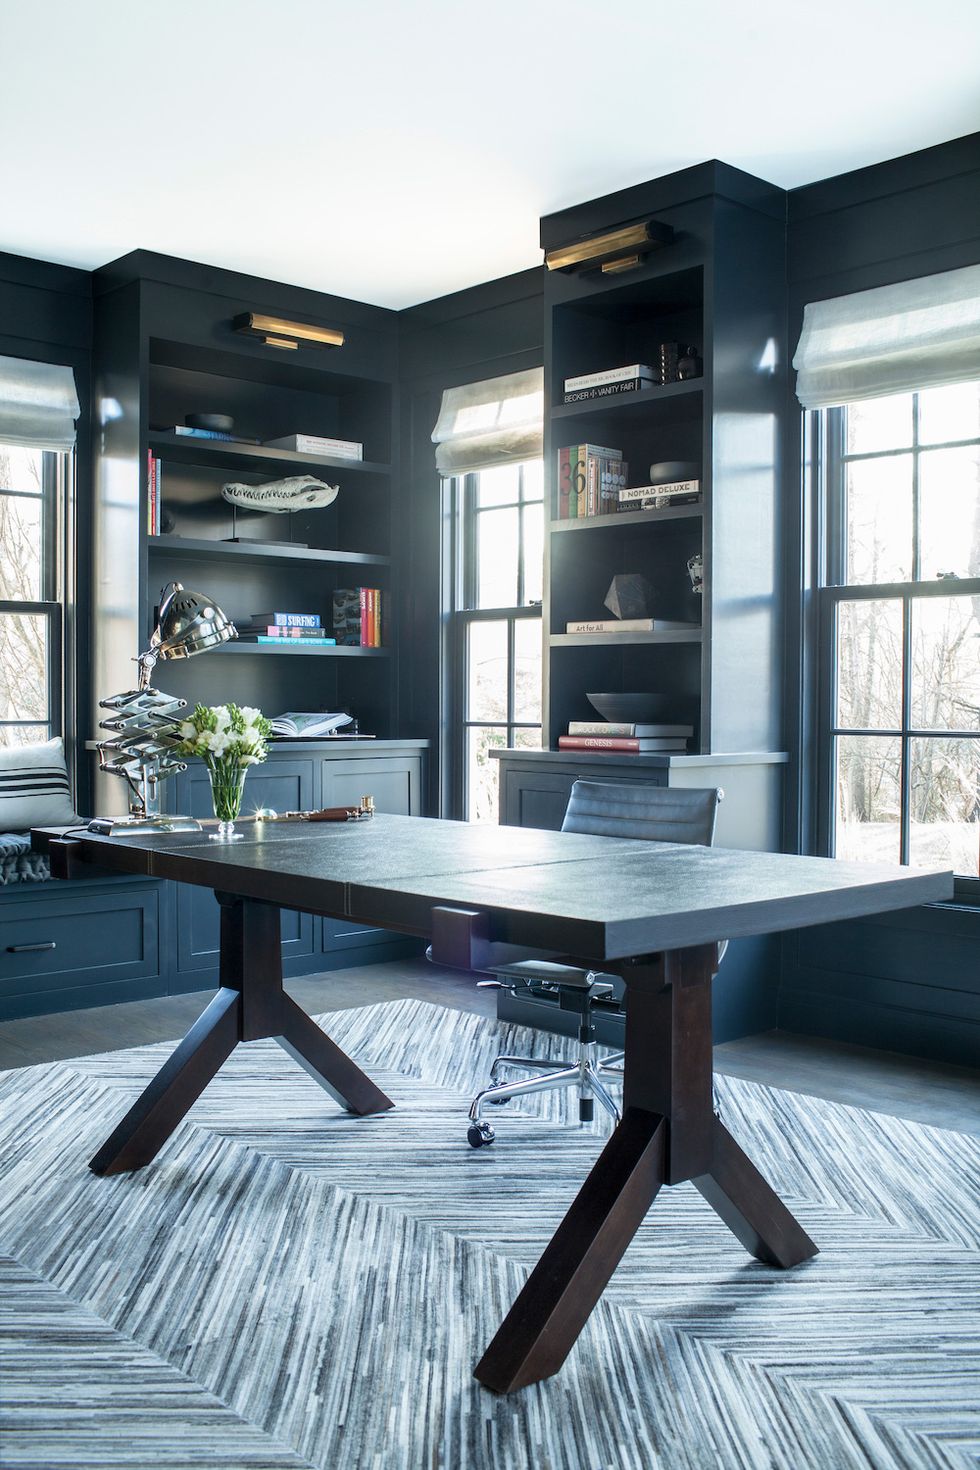 The Top 15 Home Office Trends for 2023, According to Designers